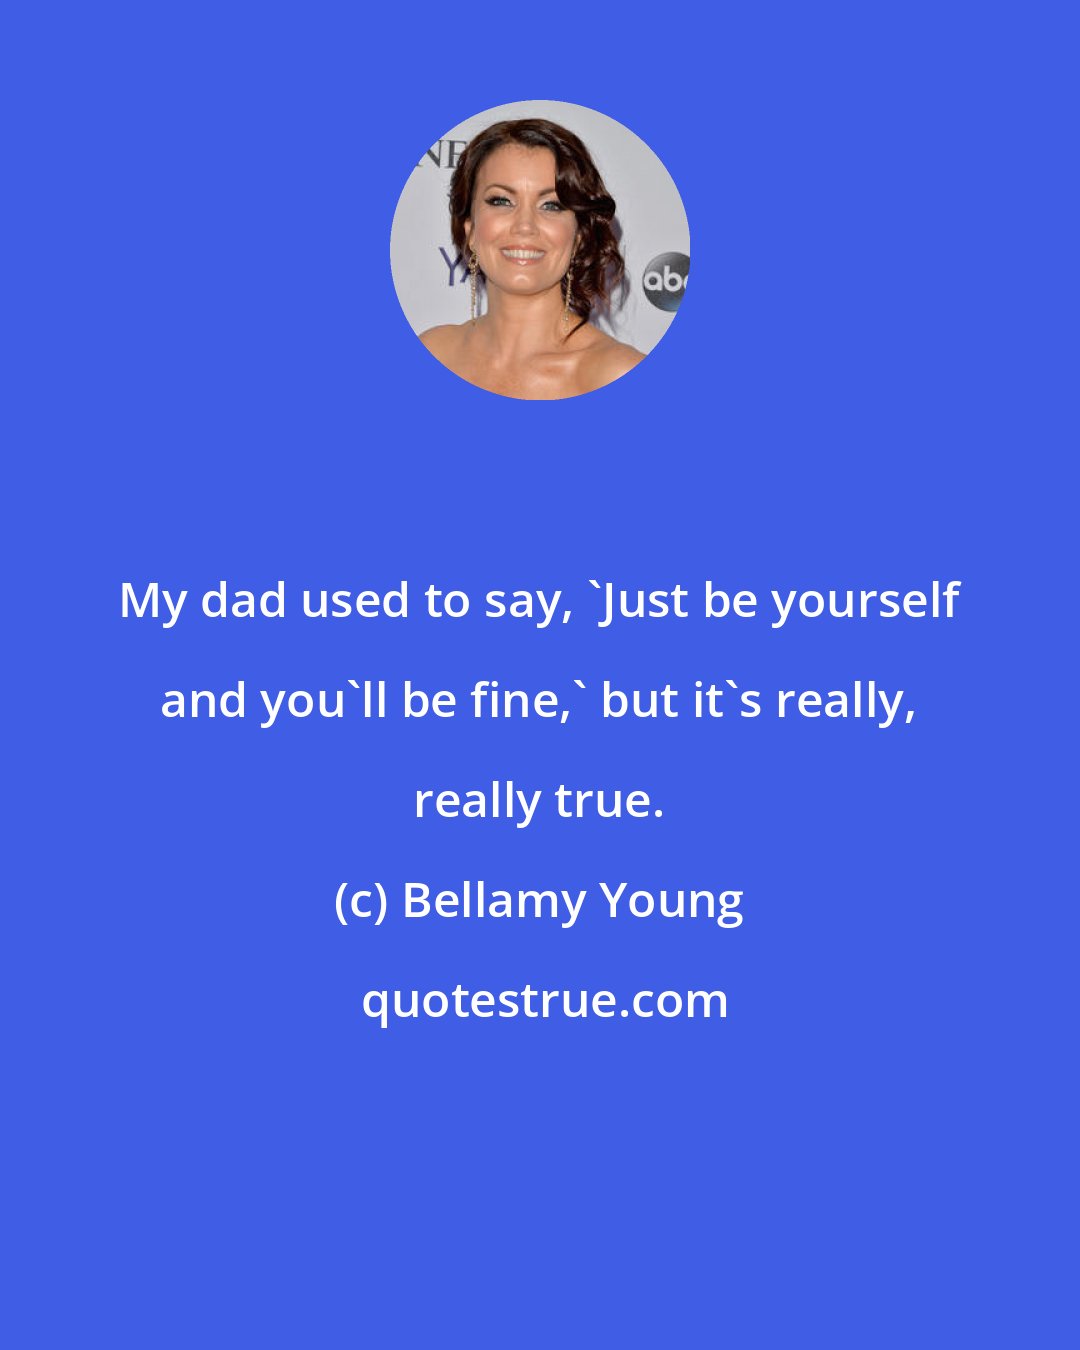 Bellamy Young: My dad used to say, 'Just be yourself and you'll be fine,' but it's really, really true.